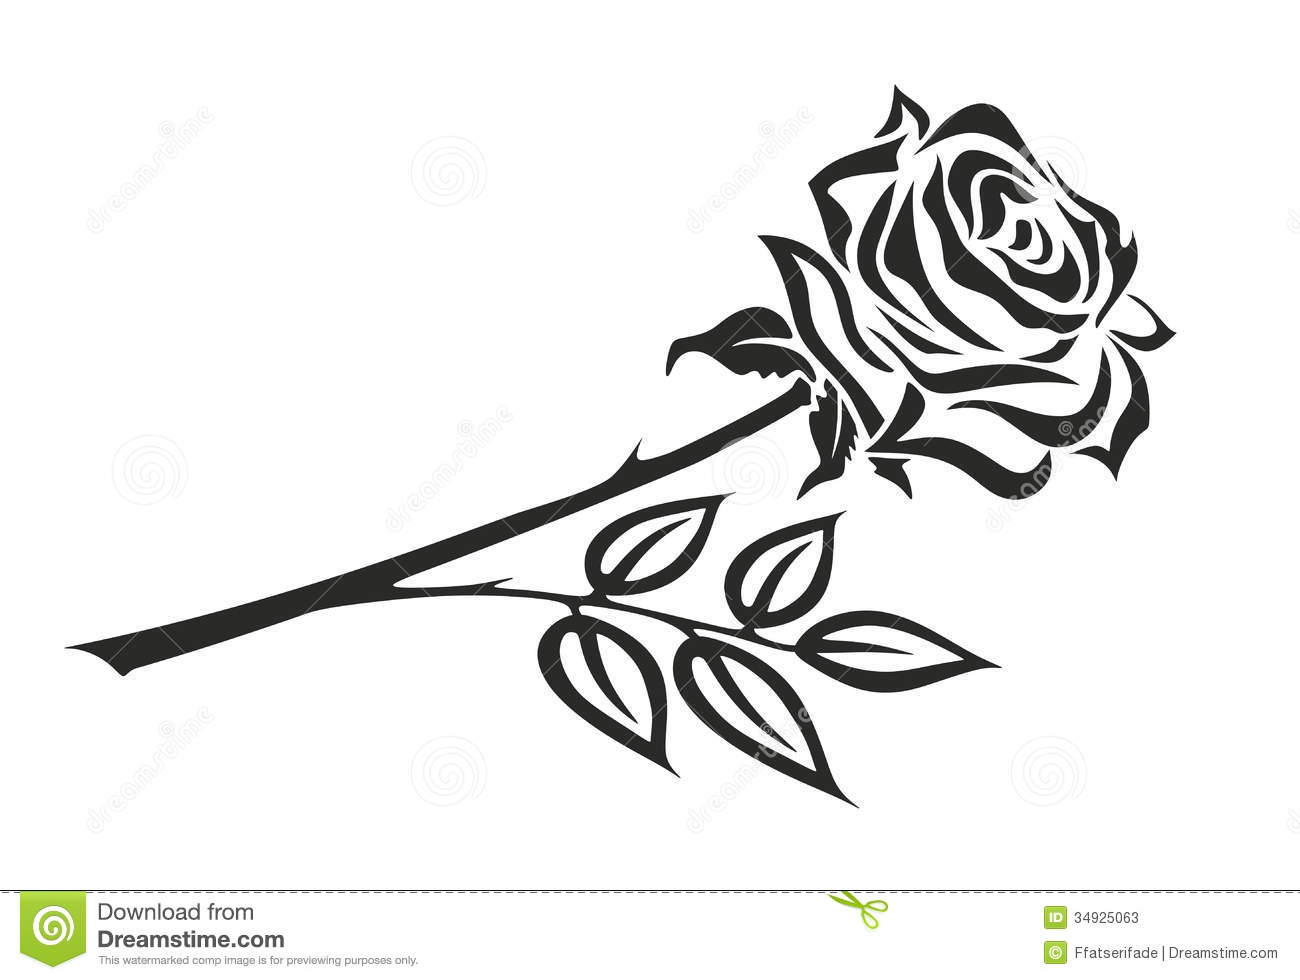 Illustration Of Black And White Rose With Thorns